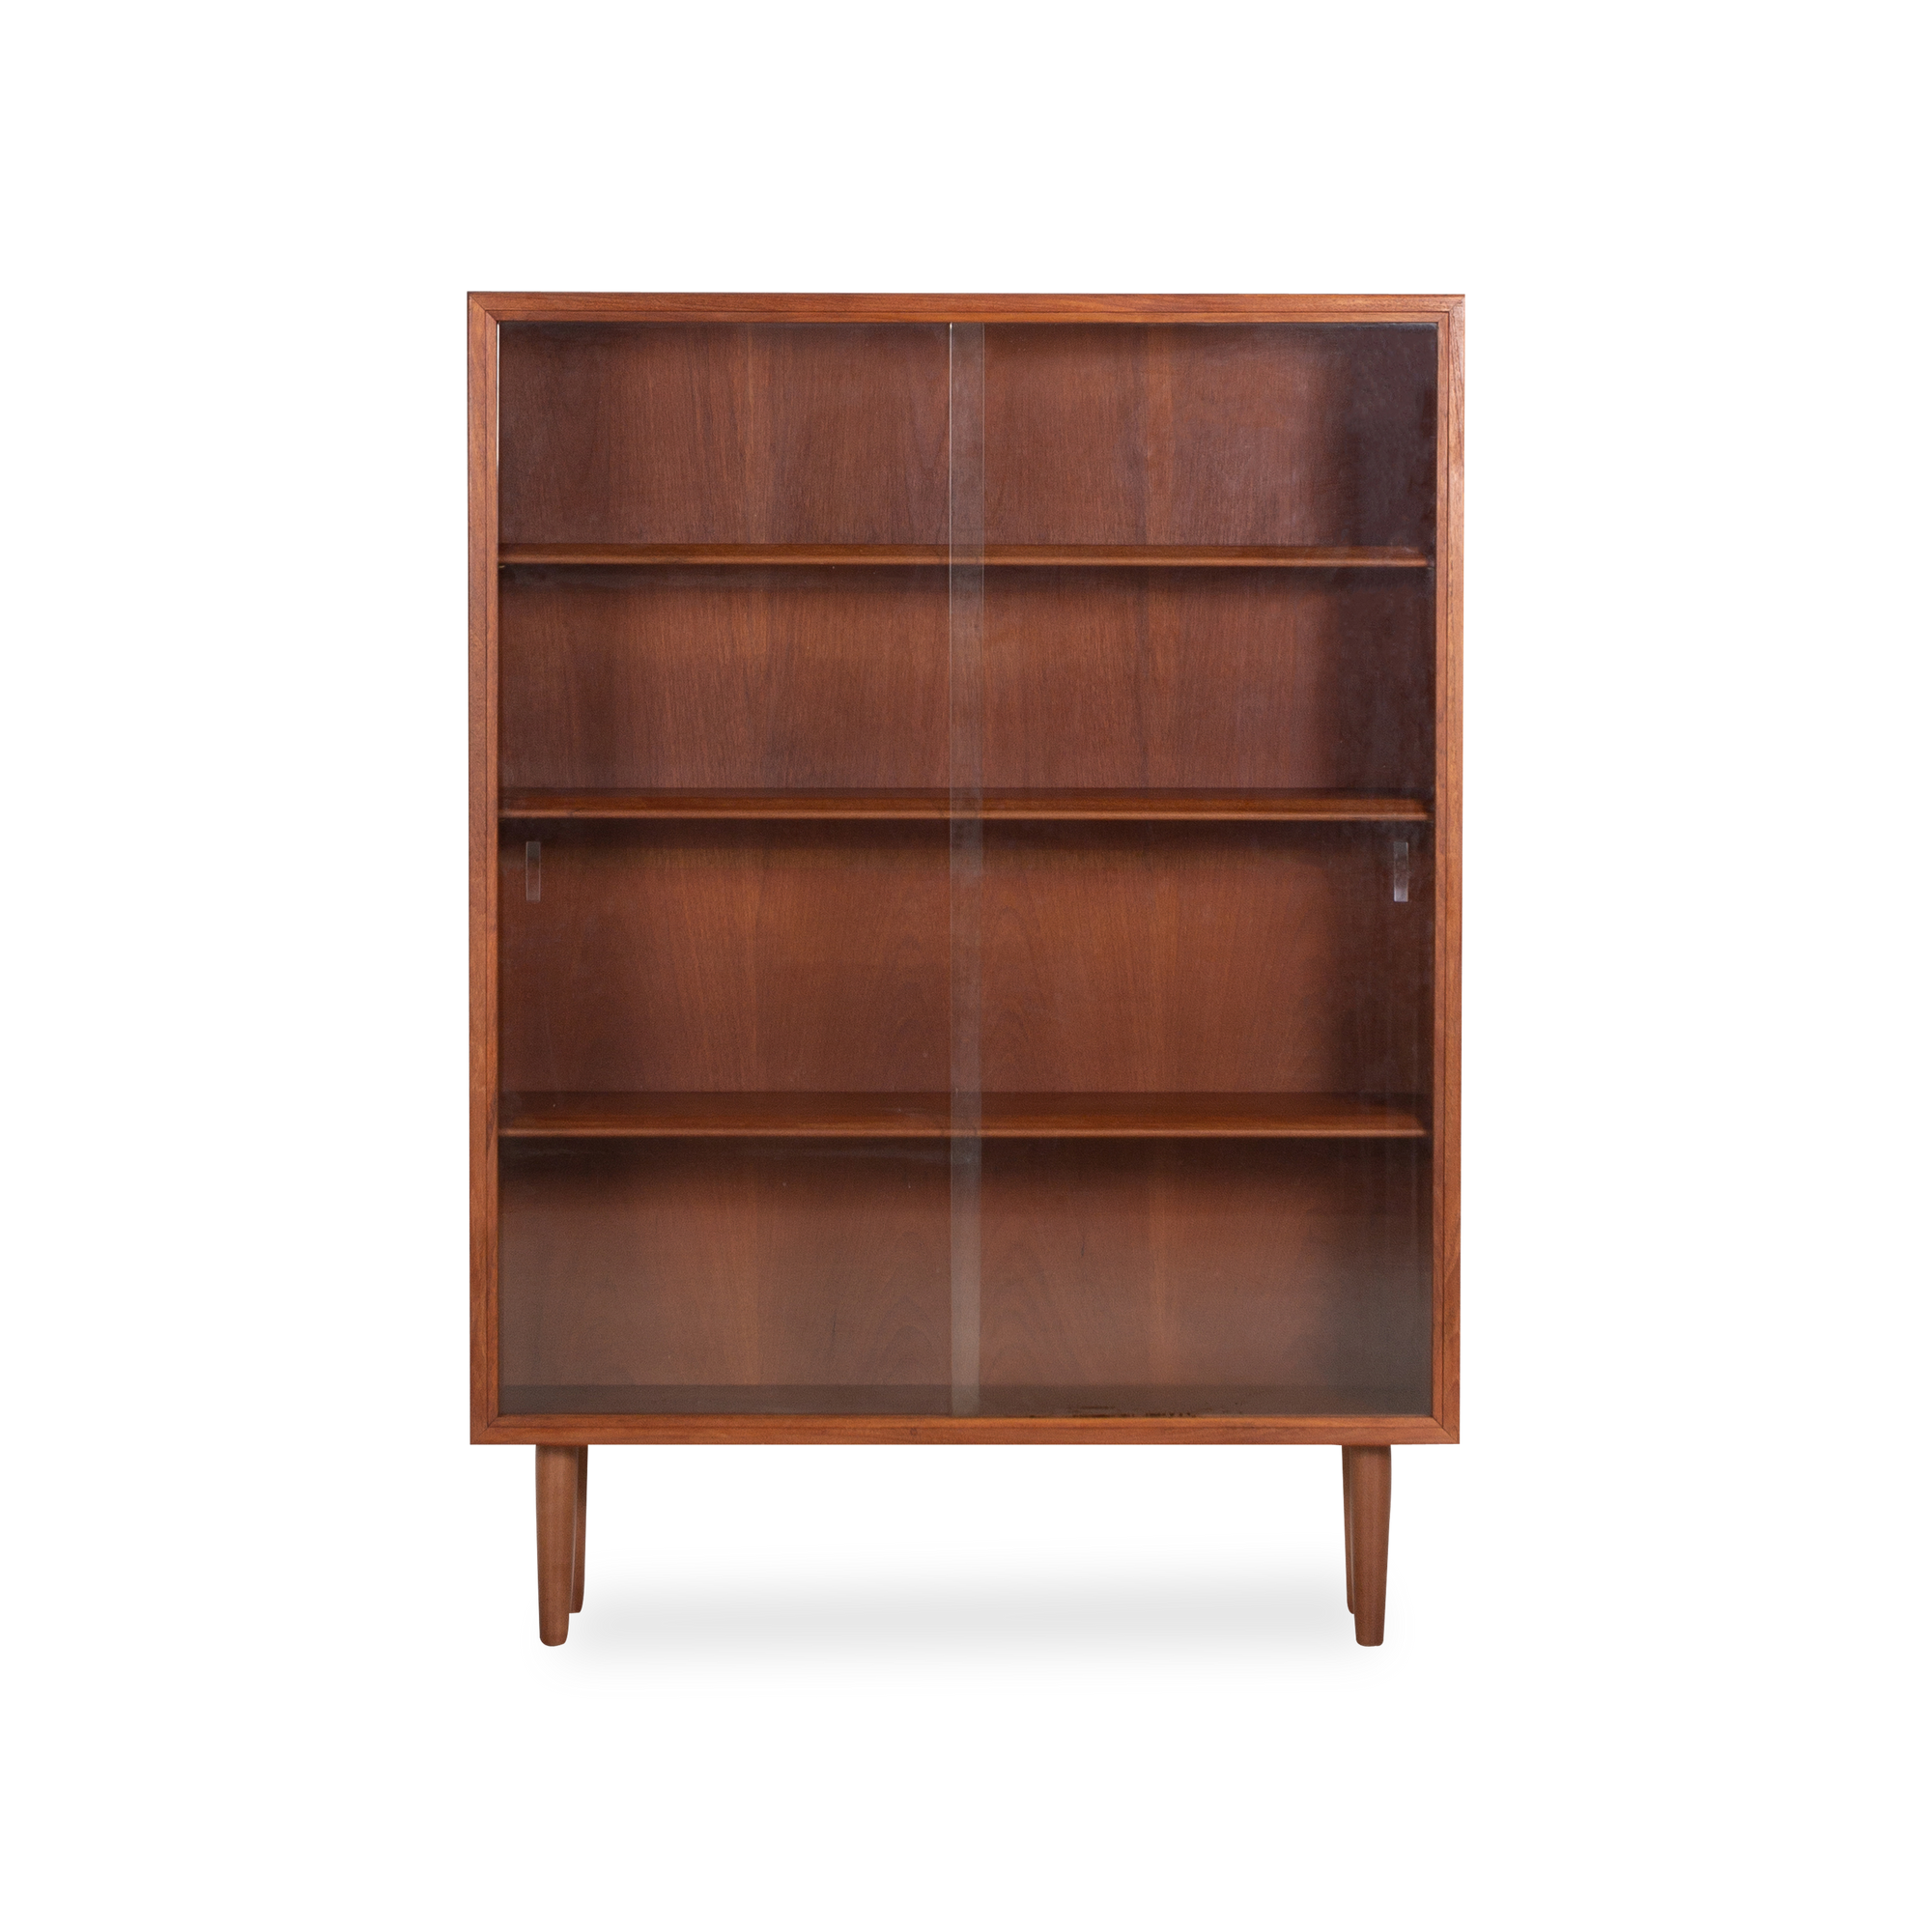 A unique accent piece, this vintage cabinet was designed by Borge Mogenson for Soborg Møbler, circa 1960s.